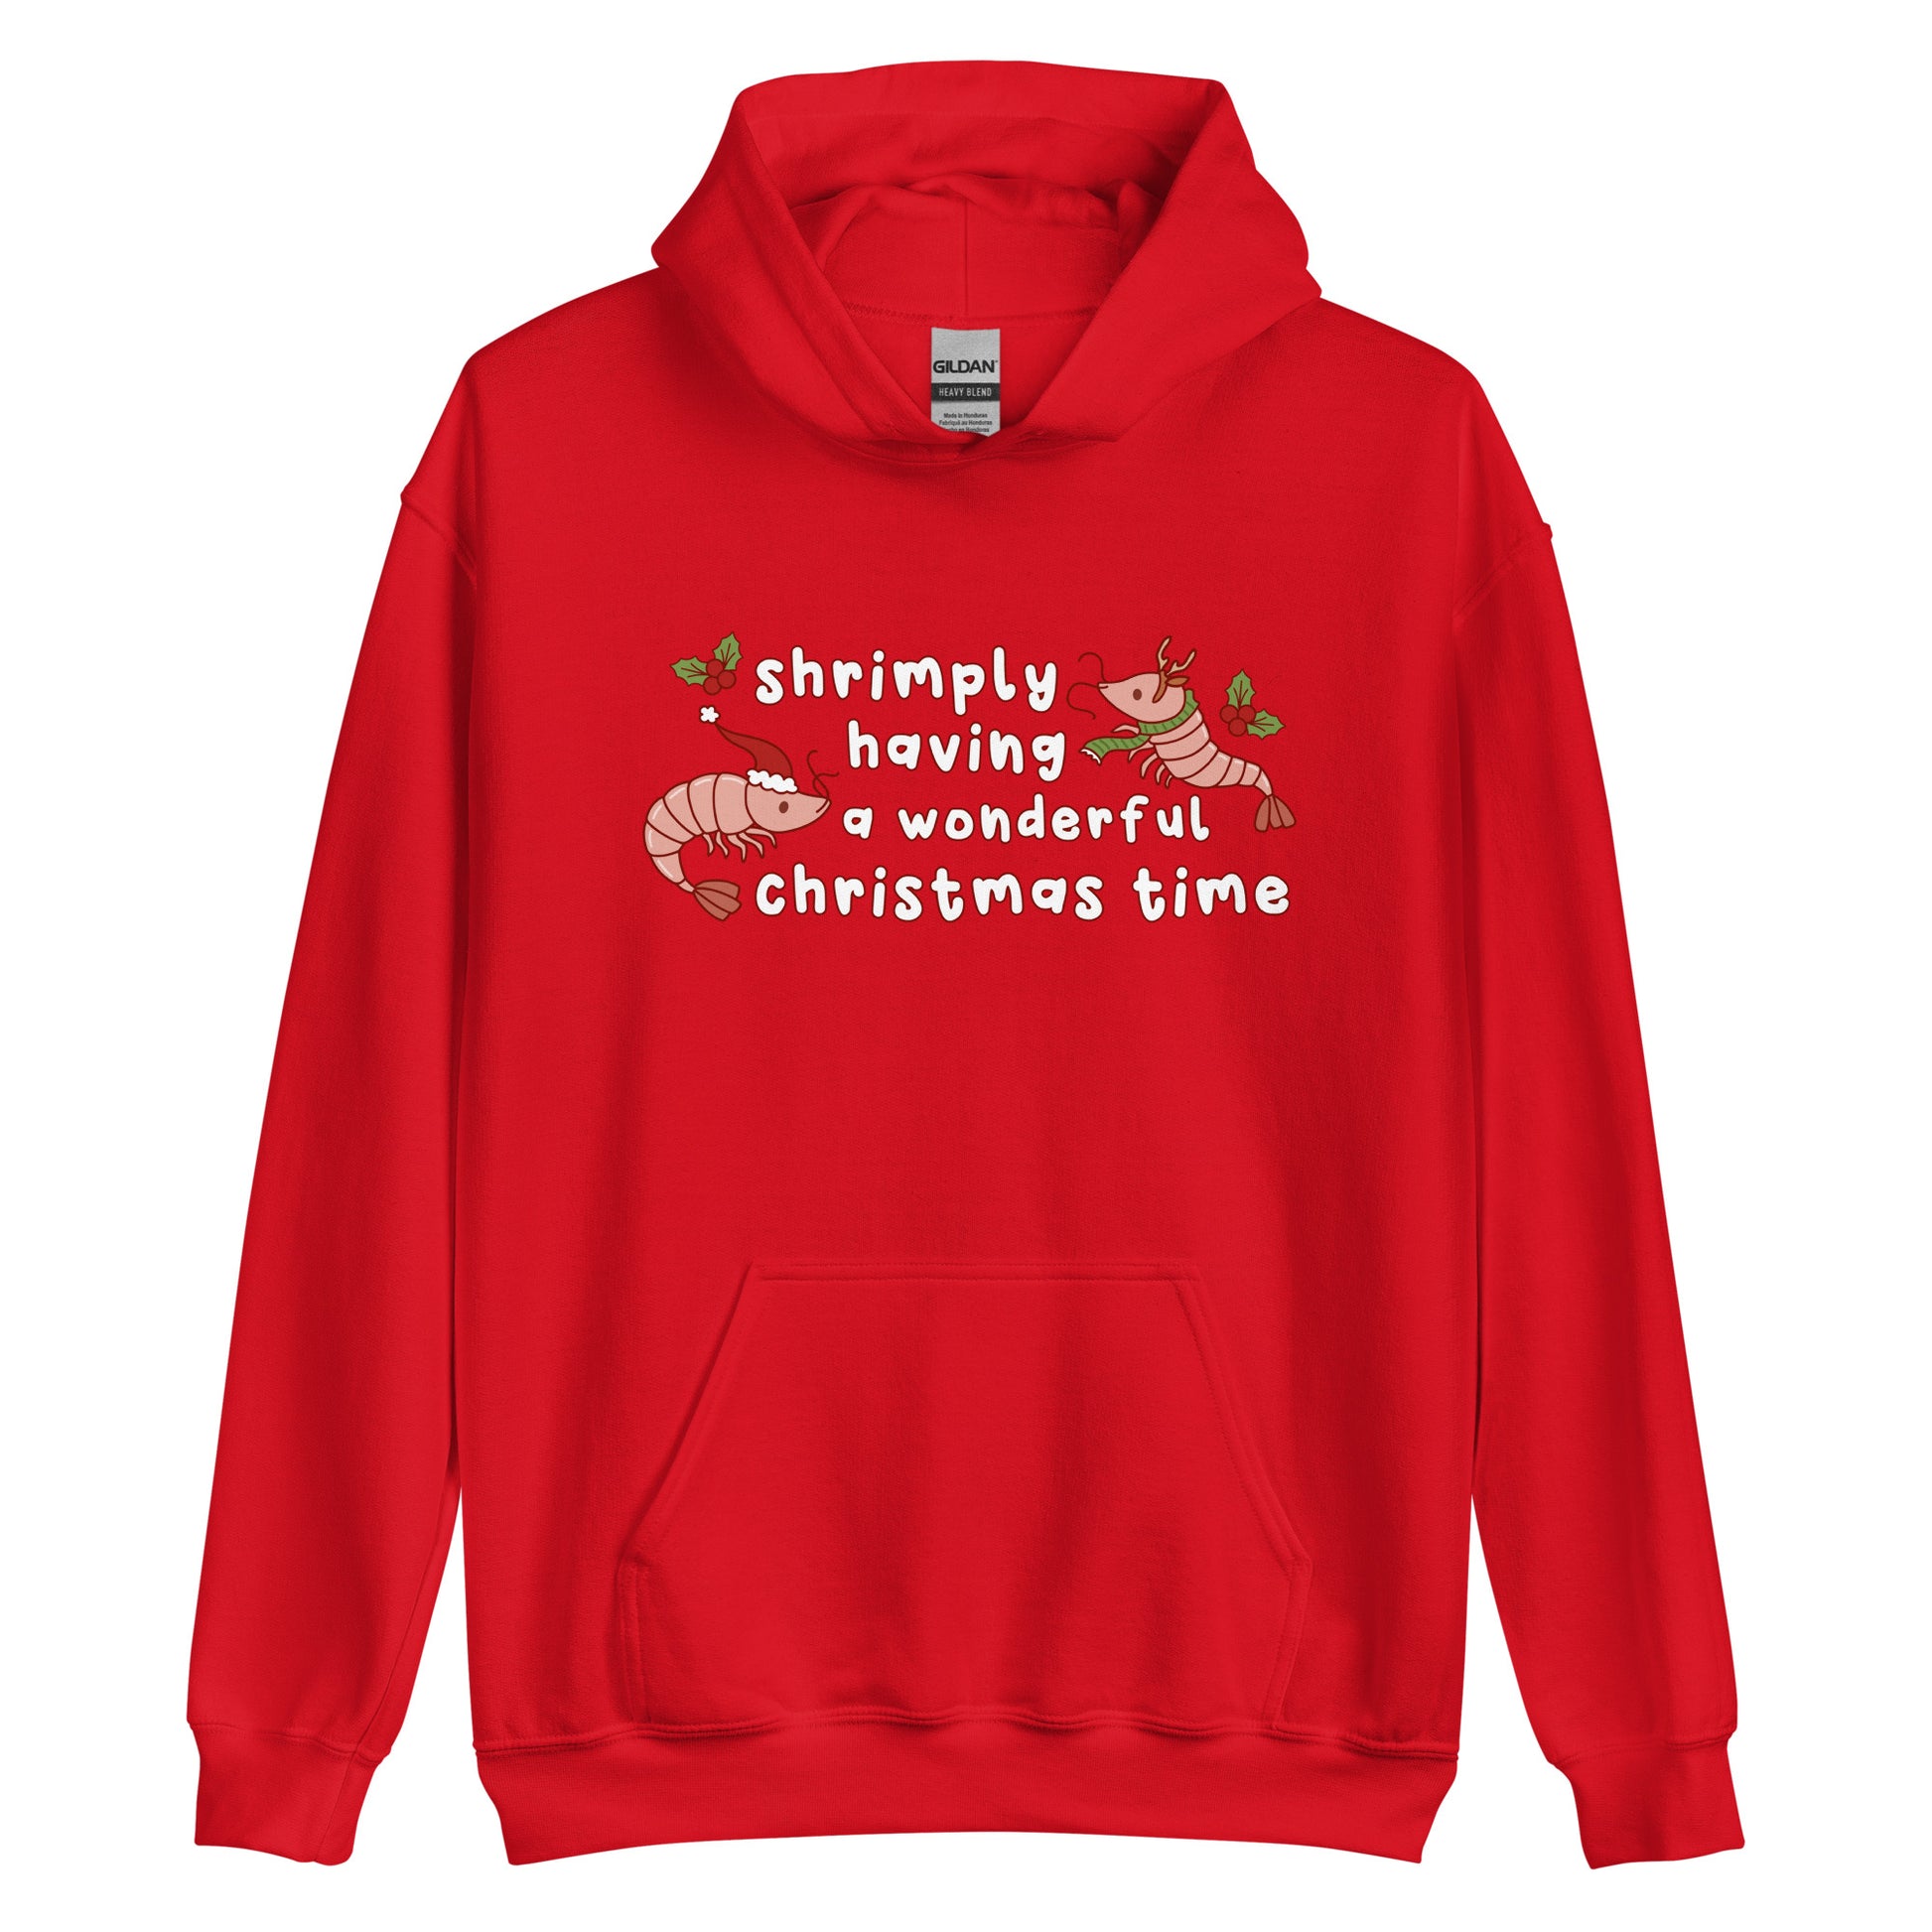 A red hooded sweatshirt featuring an illustration of two festive shrimp - one with a Santa hat, and one with reindeer antlers. Text between the shrimp reads "shrimply having a wonderful Christmas time".